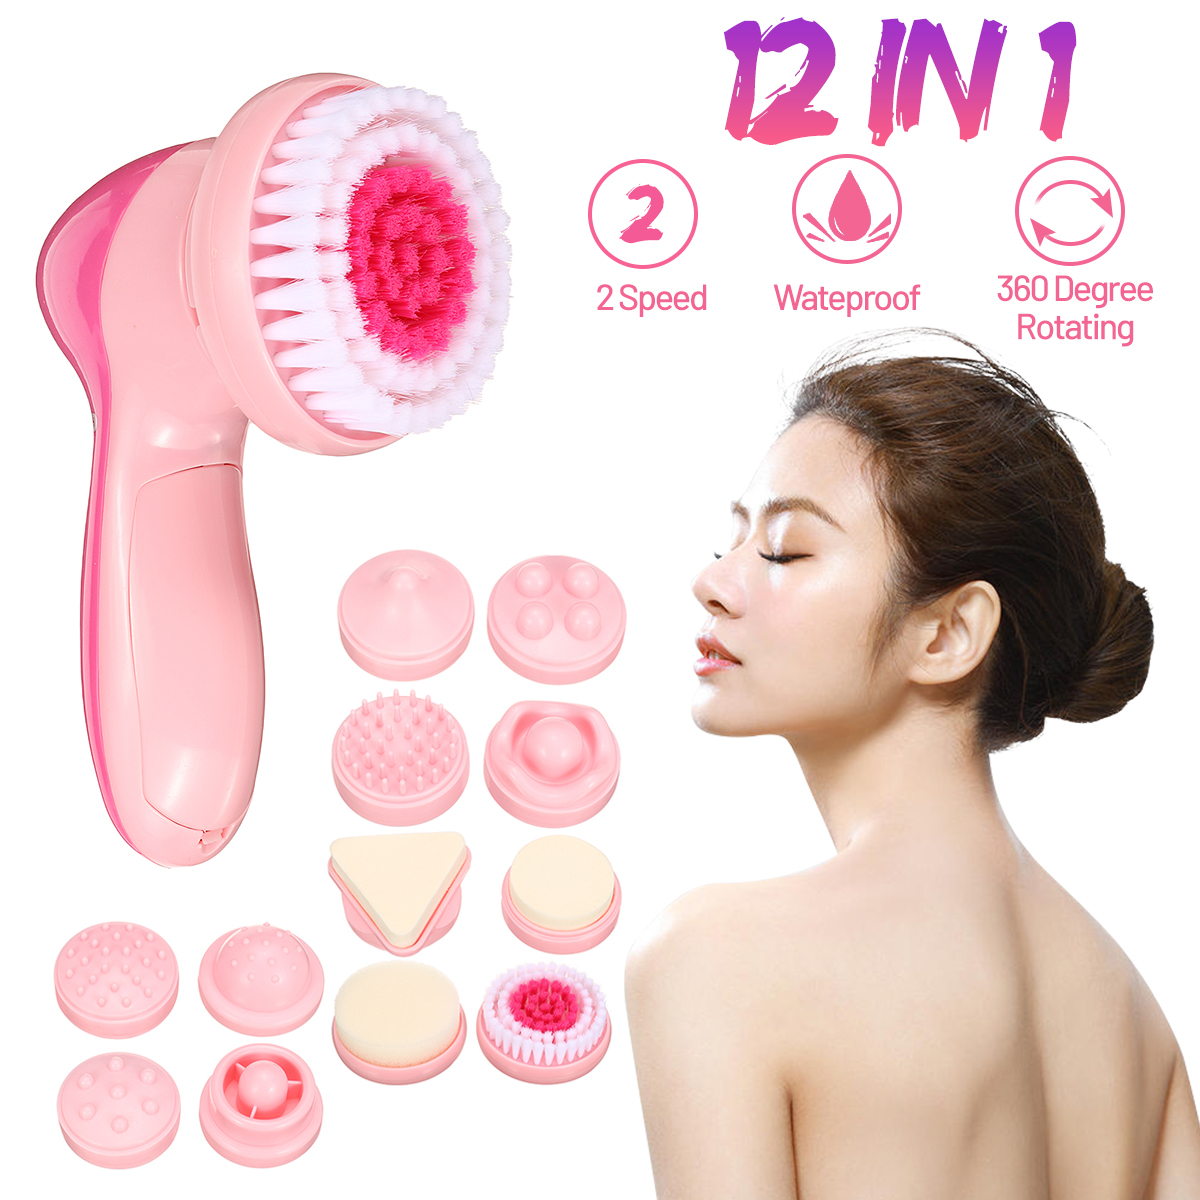 12-in-1-Electric-Facial-Cleaning-Brush-Wash-Face-Nose-Skin-Pore-Cleaner-Body-Massage-Beauty-Machine-1687416-1